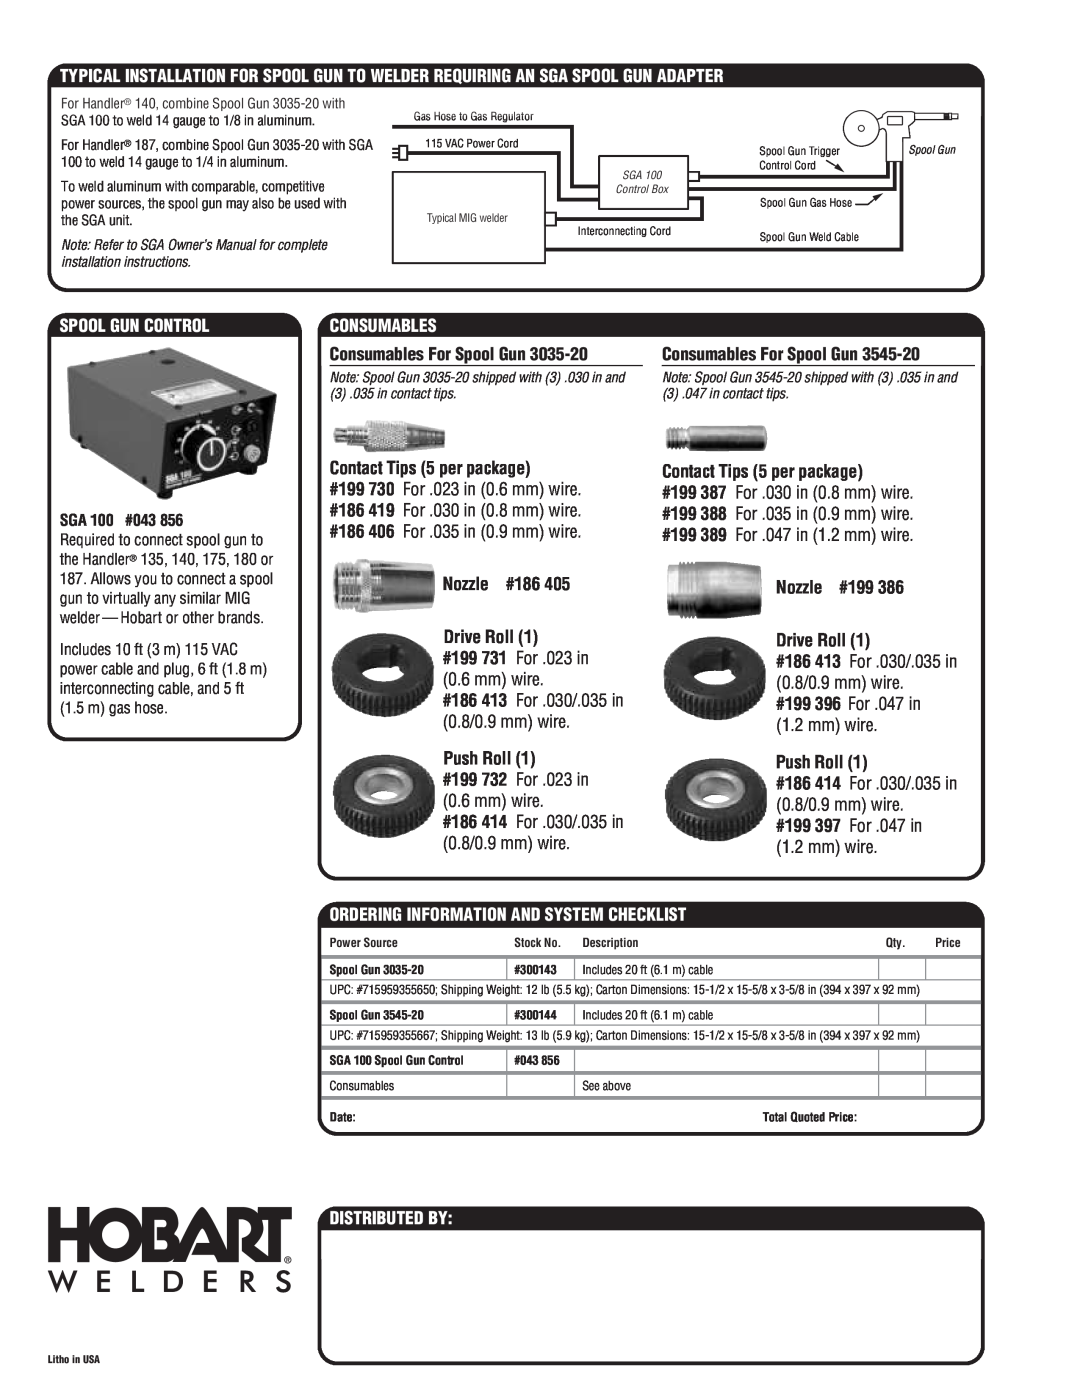 Hobart Welding Products 3035-20 Spool Gun Control, Consumables, Ordering Information And System Checklist, Distributed By 